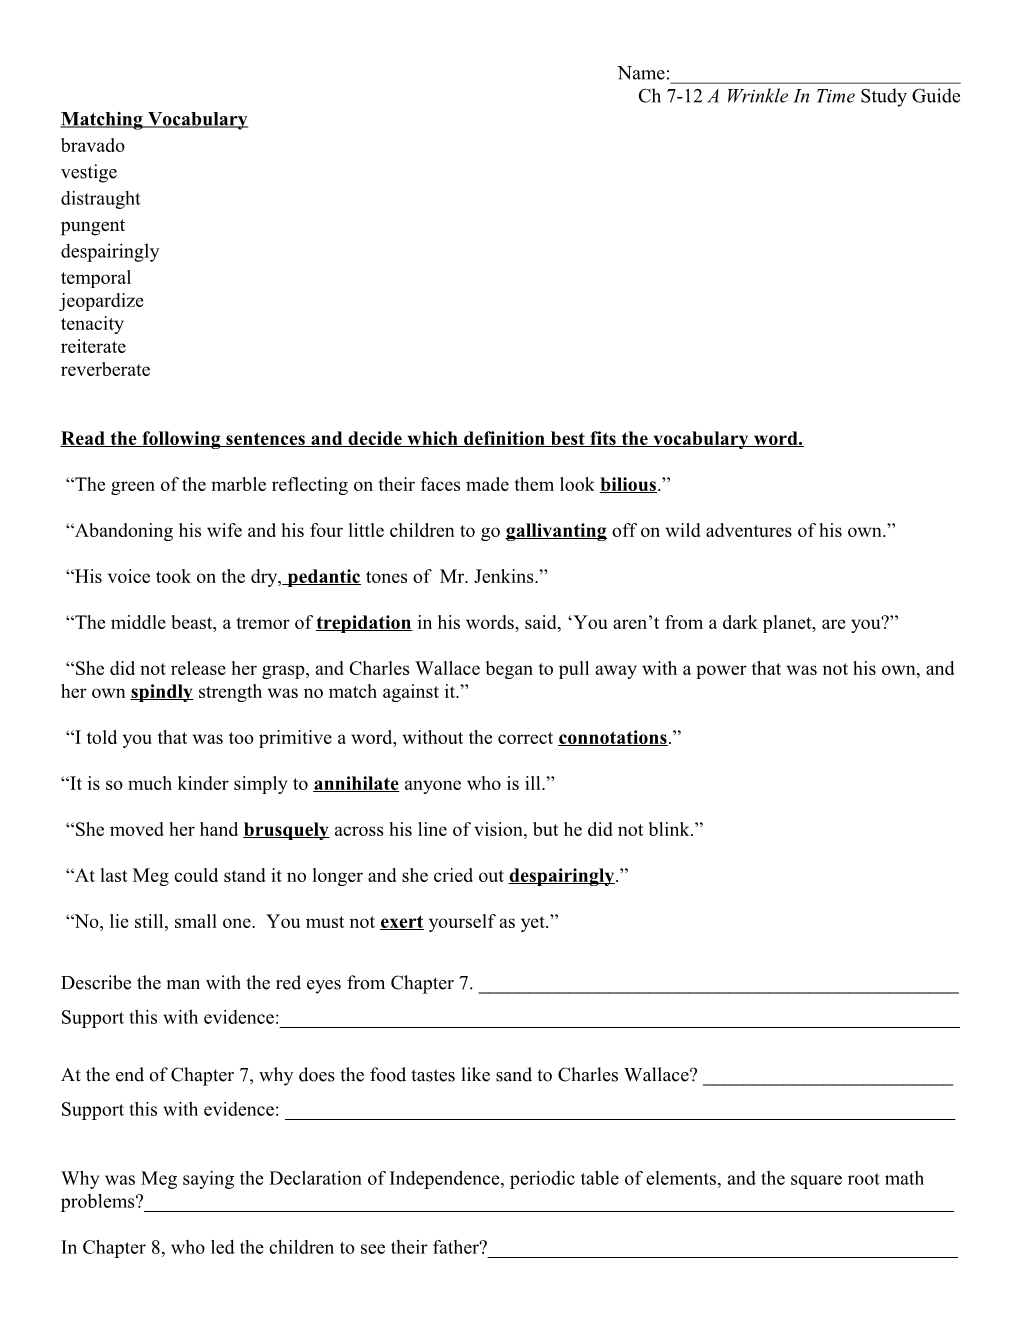 Ch 7-12 a Wrinkle in Time Study Guide